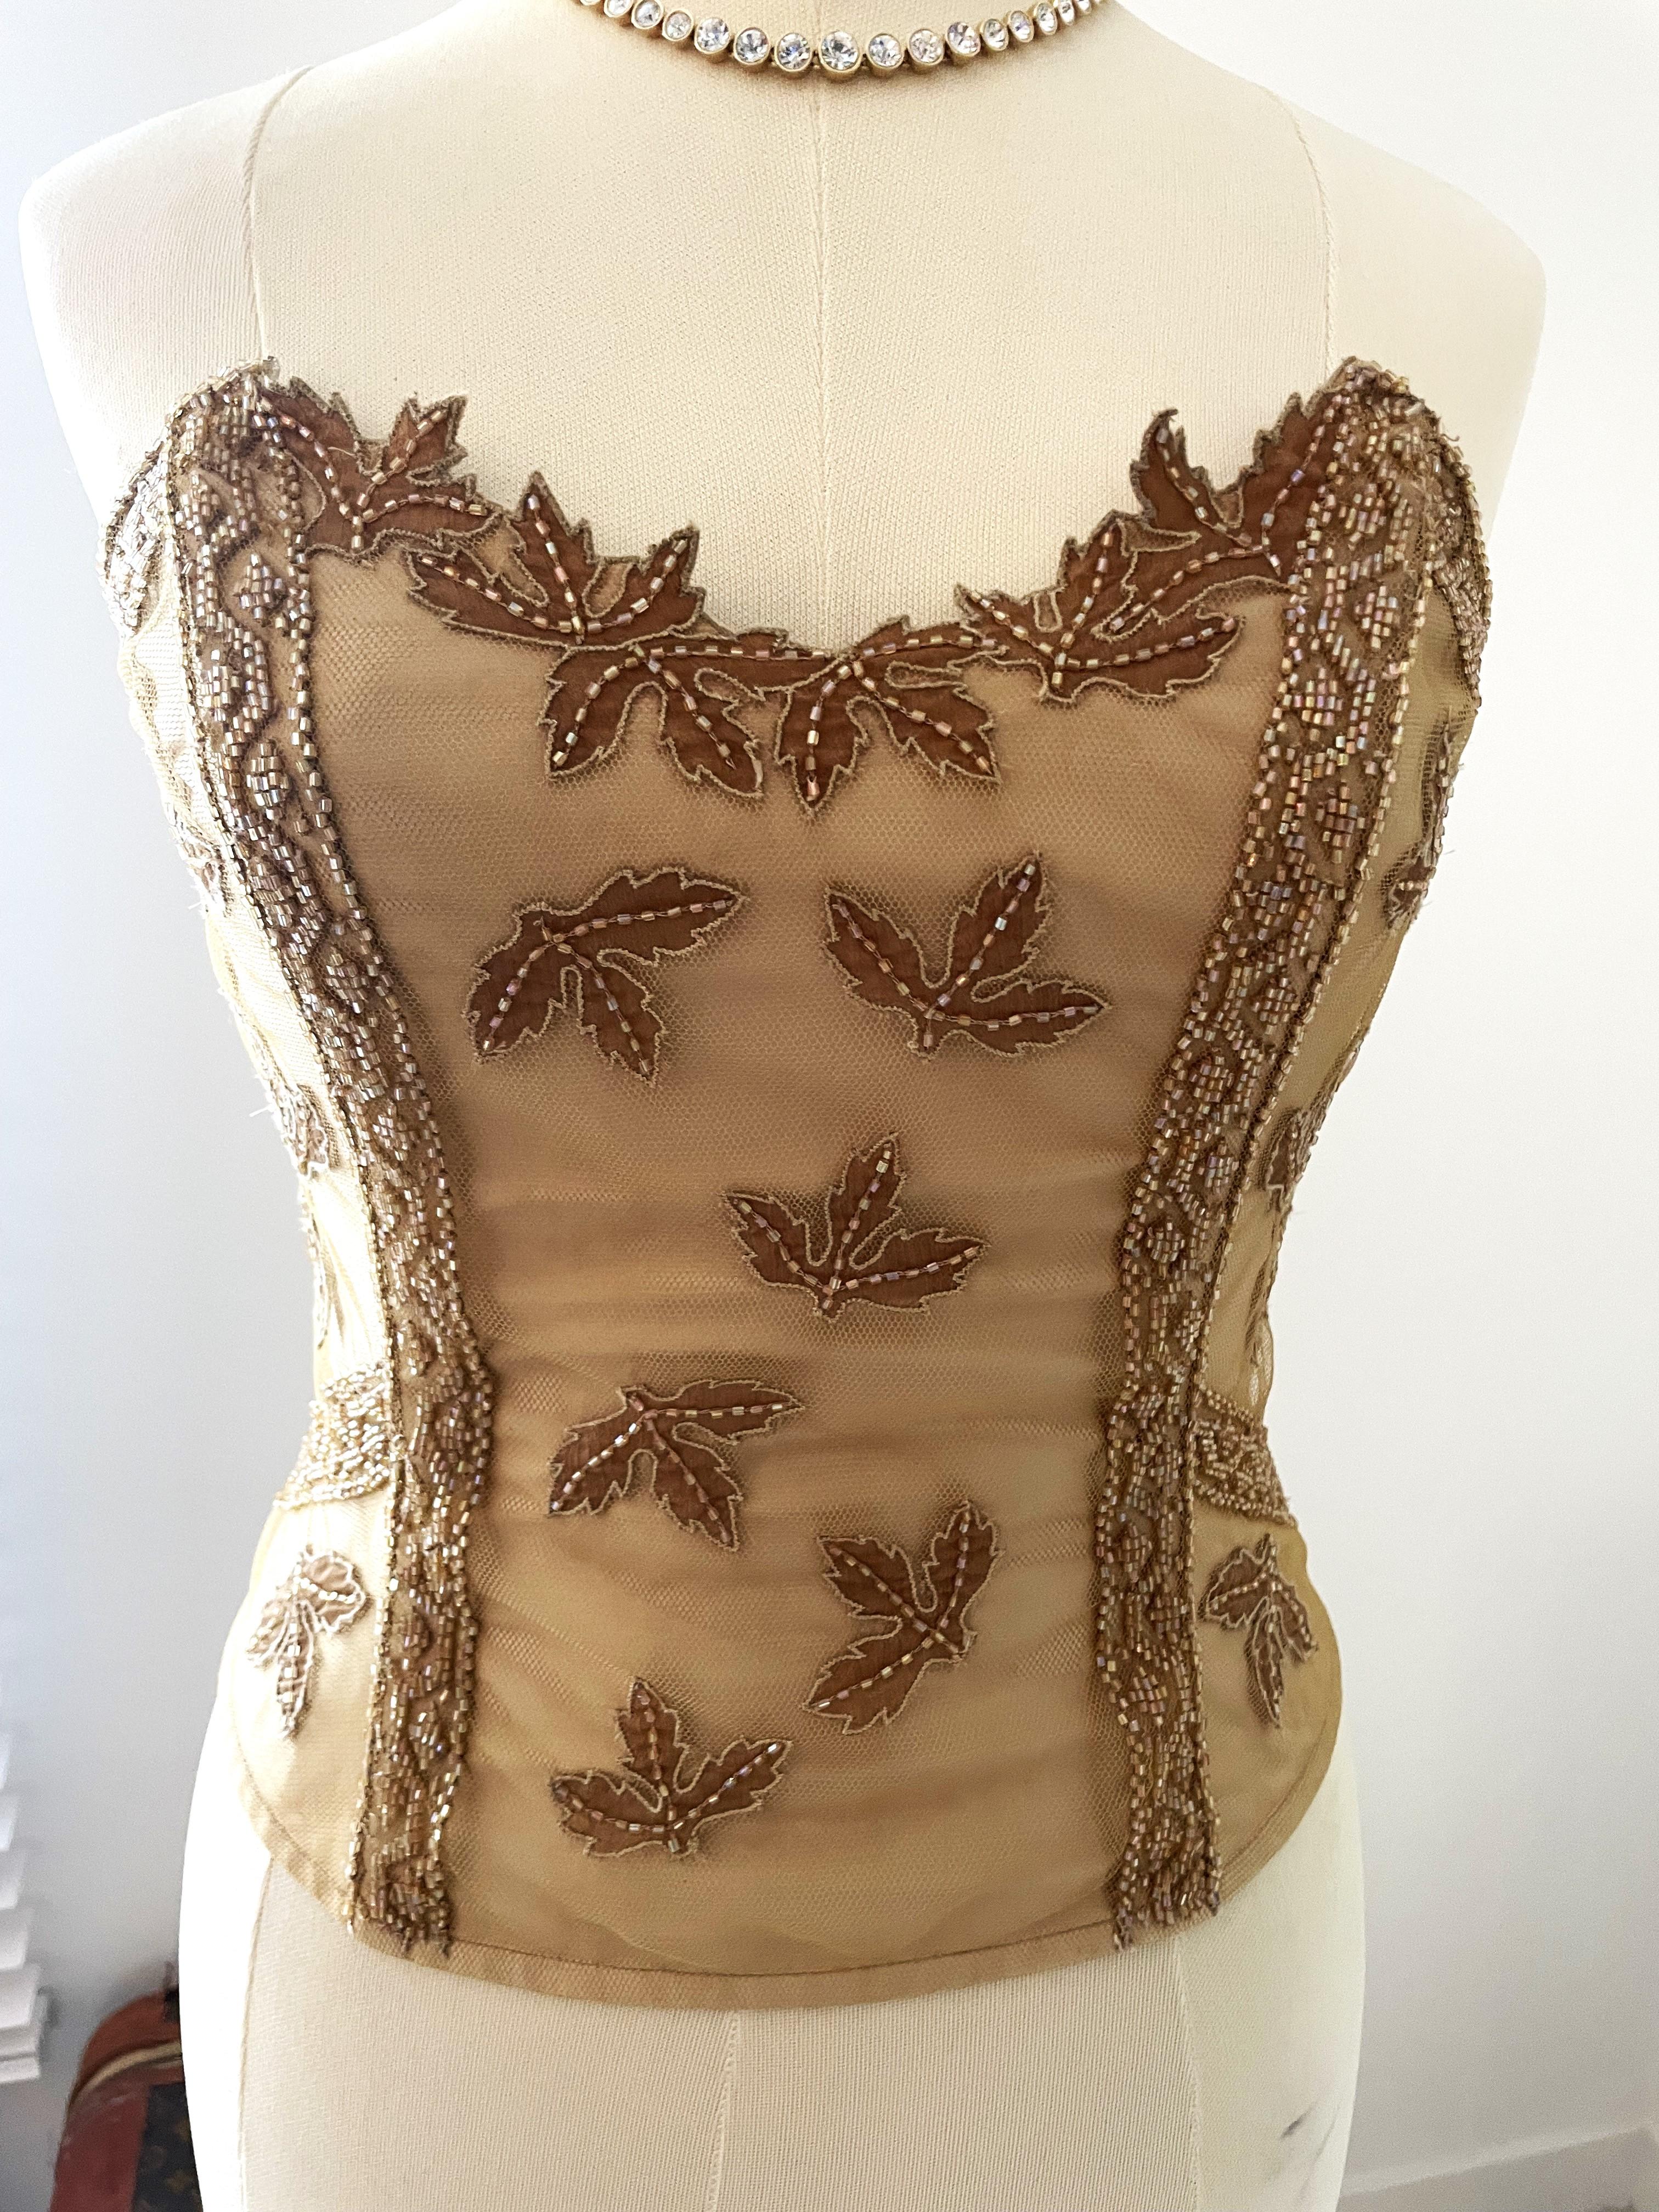 RITMO DI PERLA LA PERLA 

Vintage 2000s very well kept (new) gold luxury and high-quality corset top. Very sensual & sexy. Embroidered with a layer of tulle with leaves and beads and a zipper at the back.

Vintage La Perla corsets typically feature